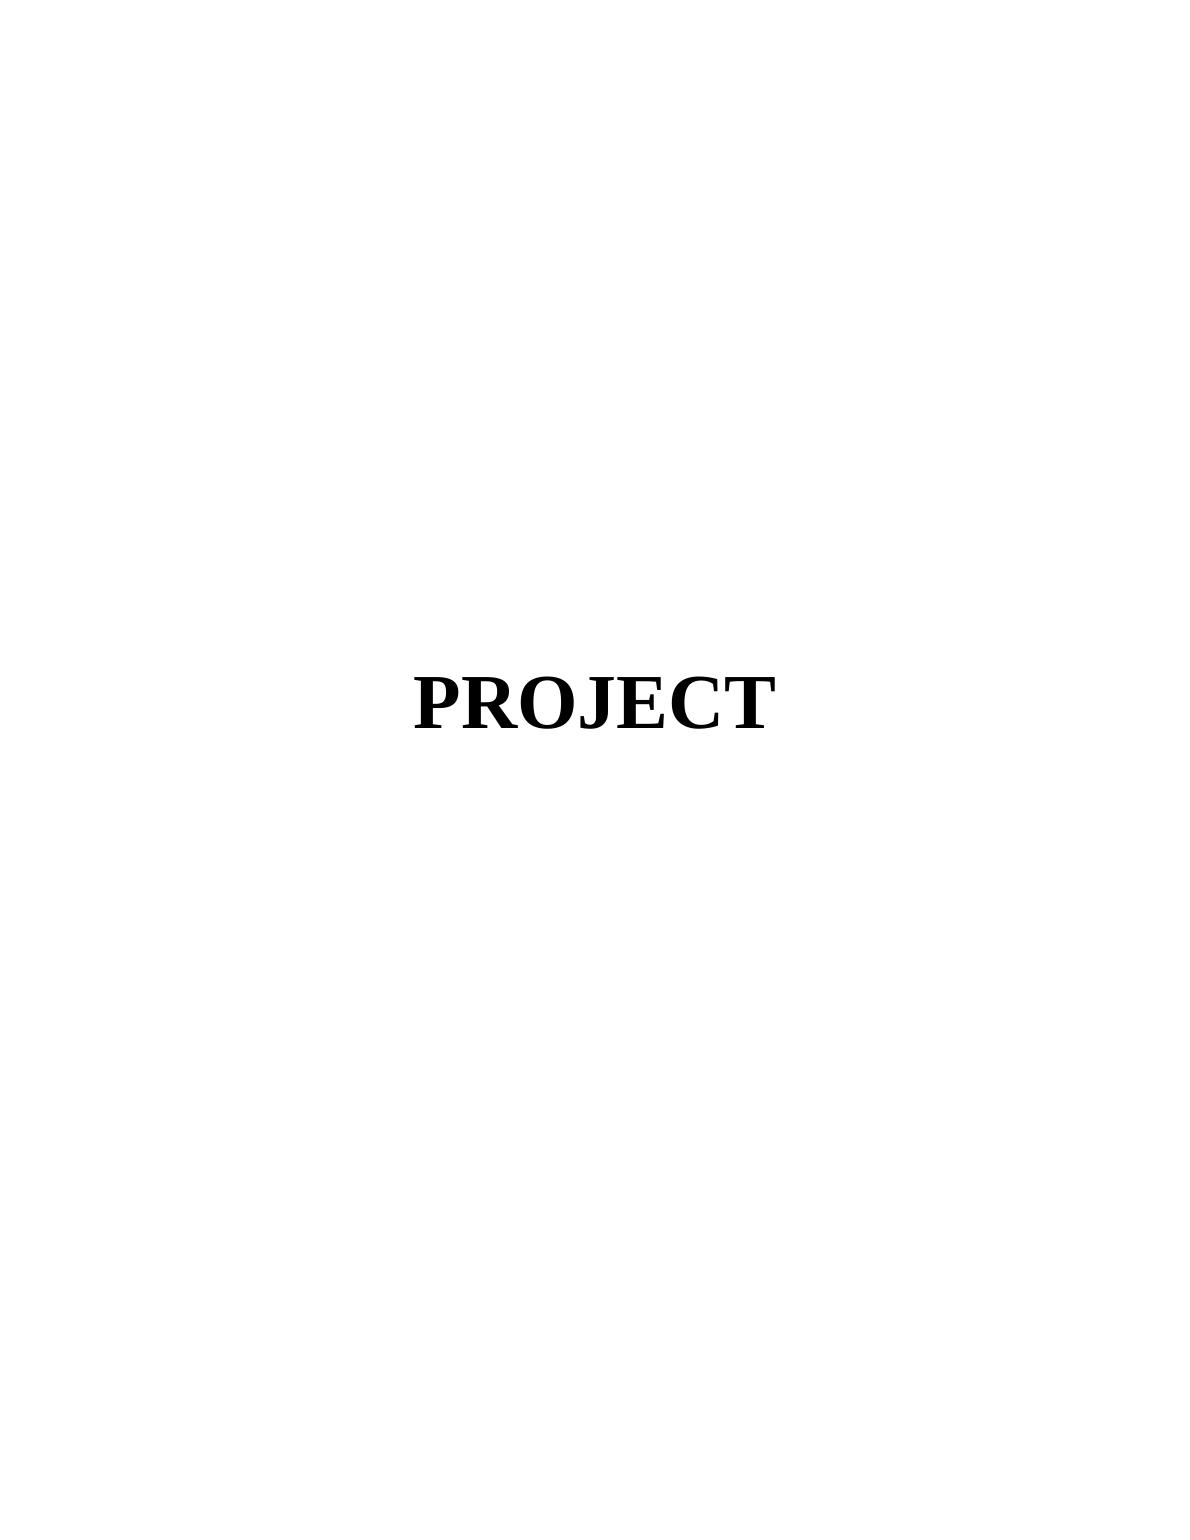 The Project TABLE OF CONTENTS INTRODUCTION_1